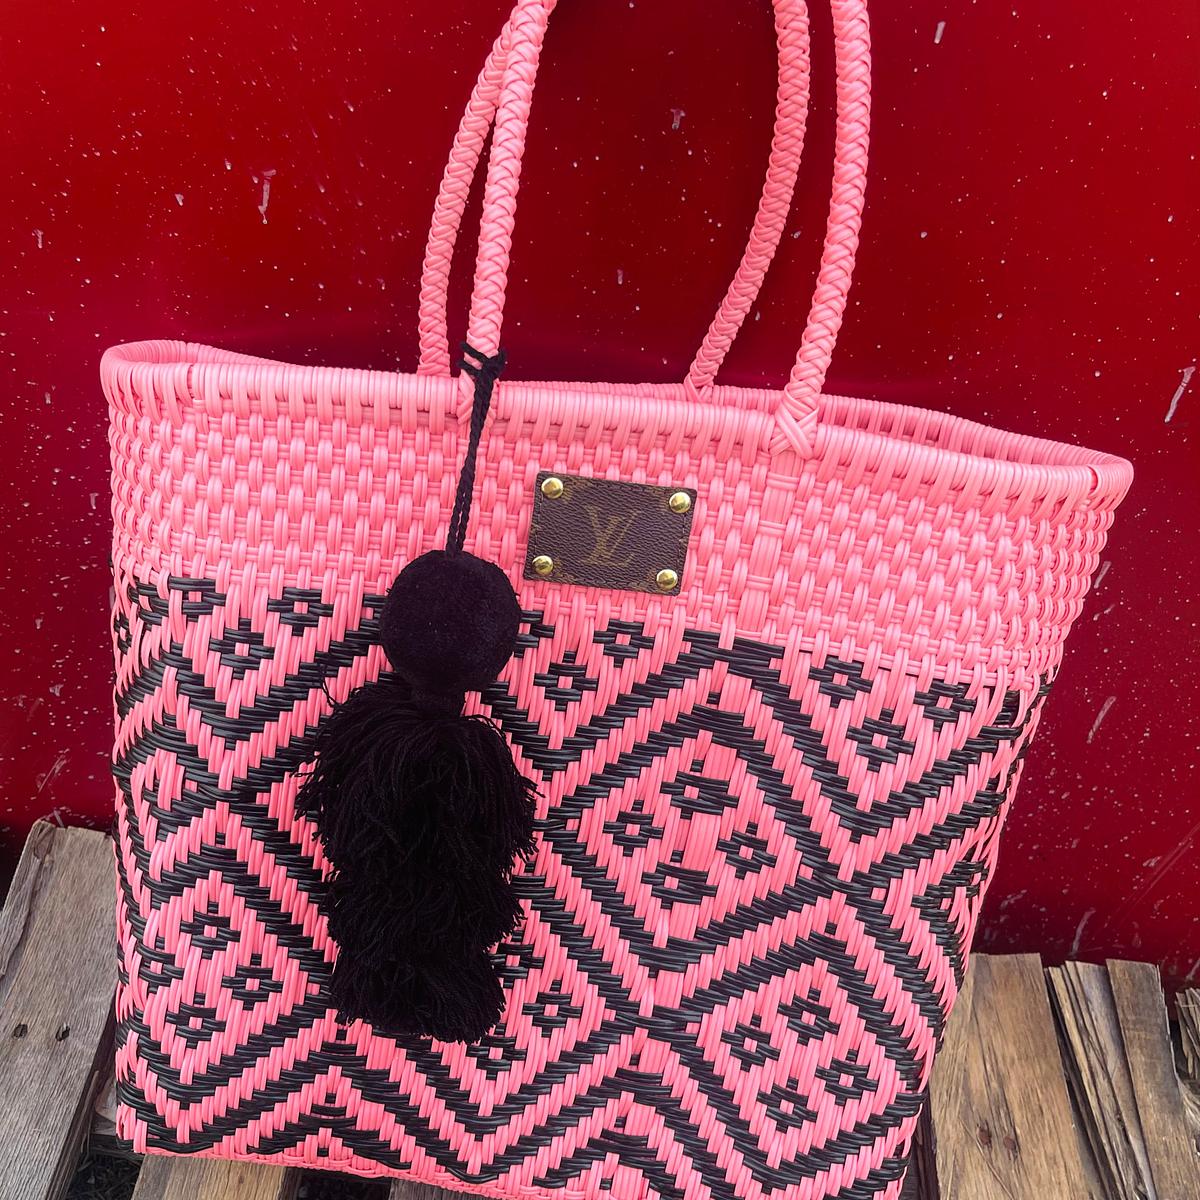 Upcycled LV Mayan Handcrafted and Woven Tassle Tote Bag with